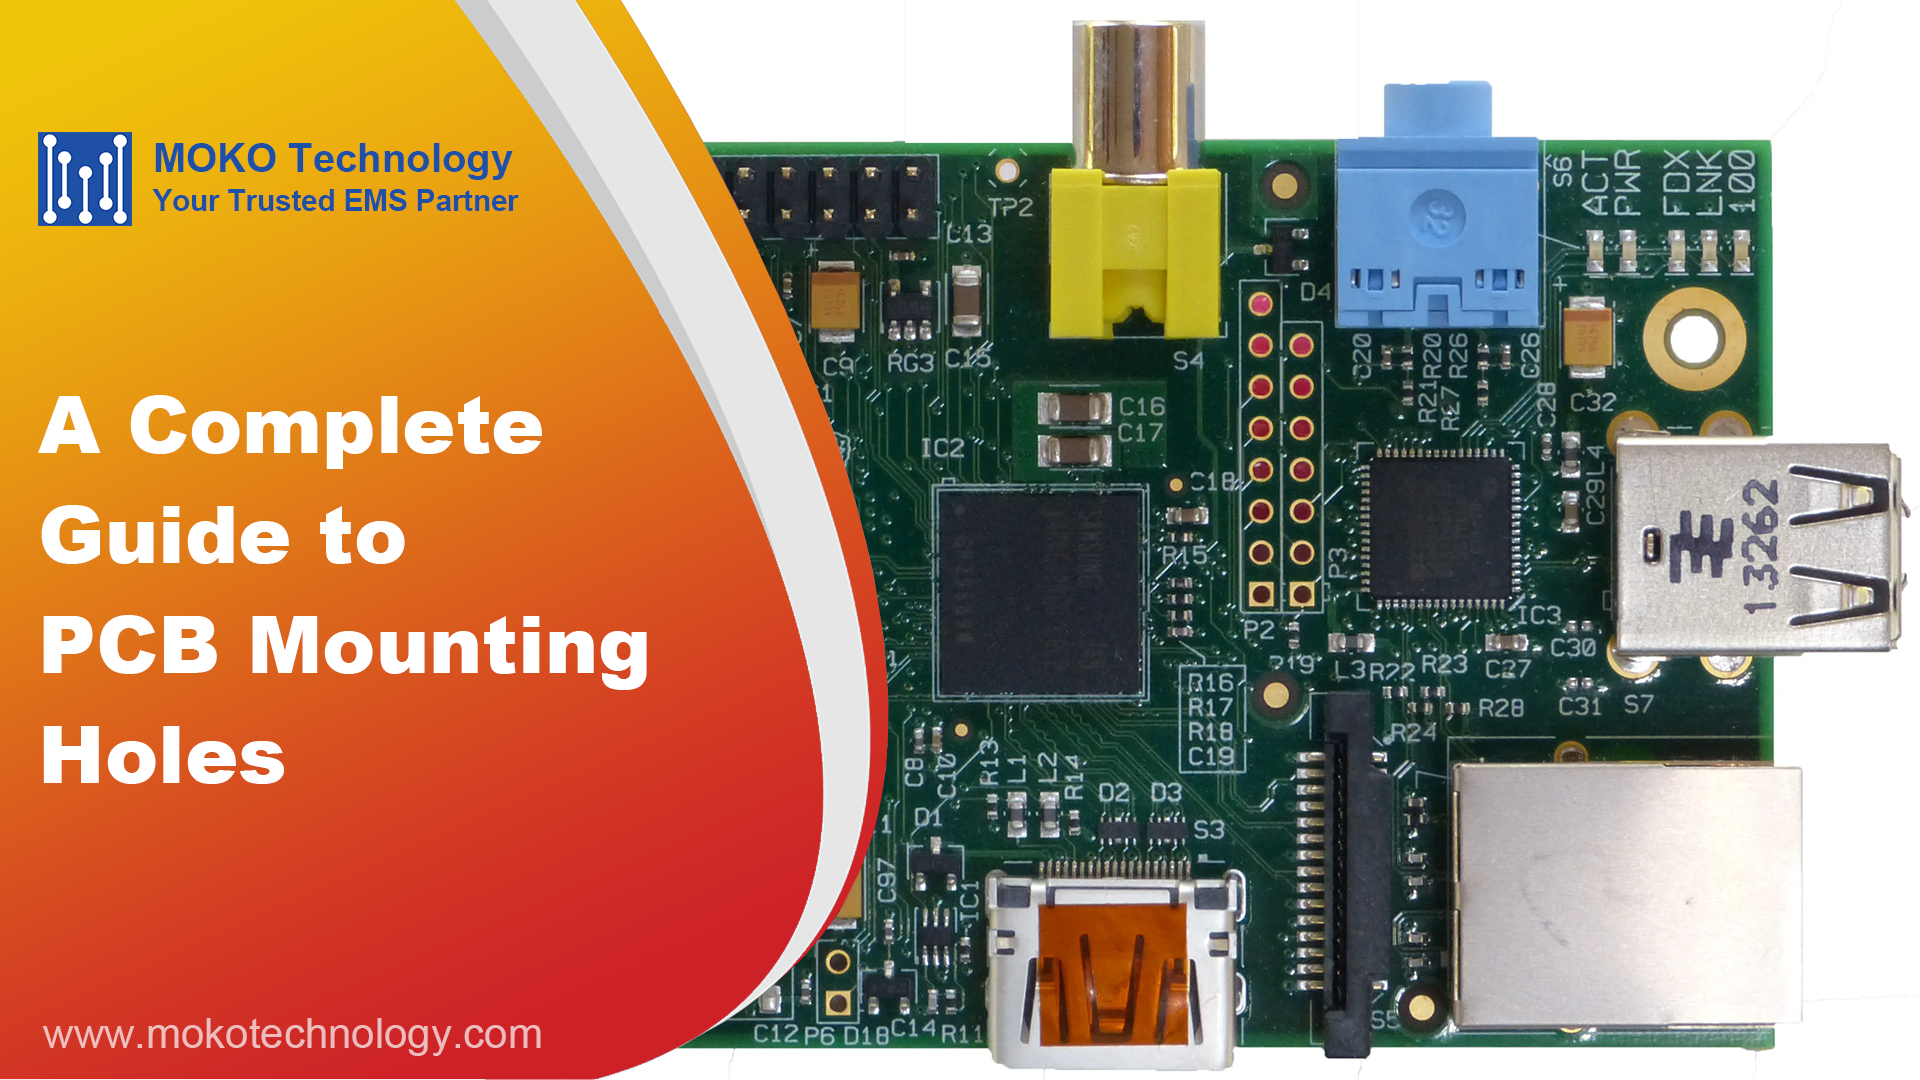 A Complete Guide to PCB Mounting Holes